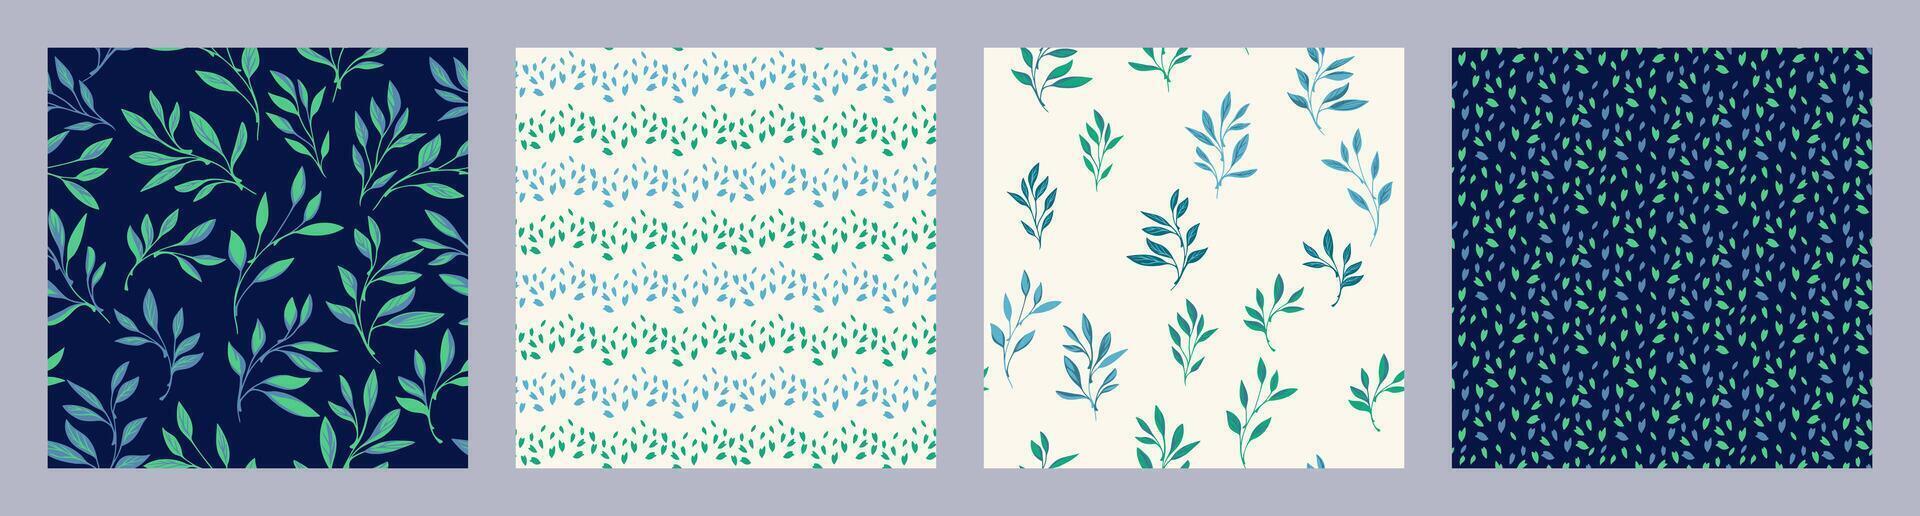 Light collage of set seamless patterns with green tiny abstract branches leaves, simple random spots, polka dots, lines, textures drops rhombus.Vector hand drawn sketch.Templates for design, printing vector